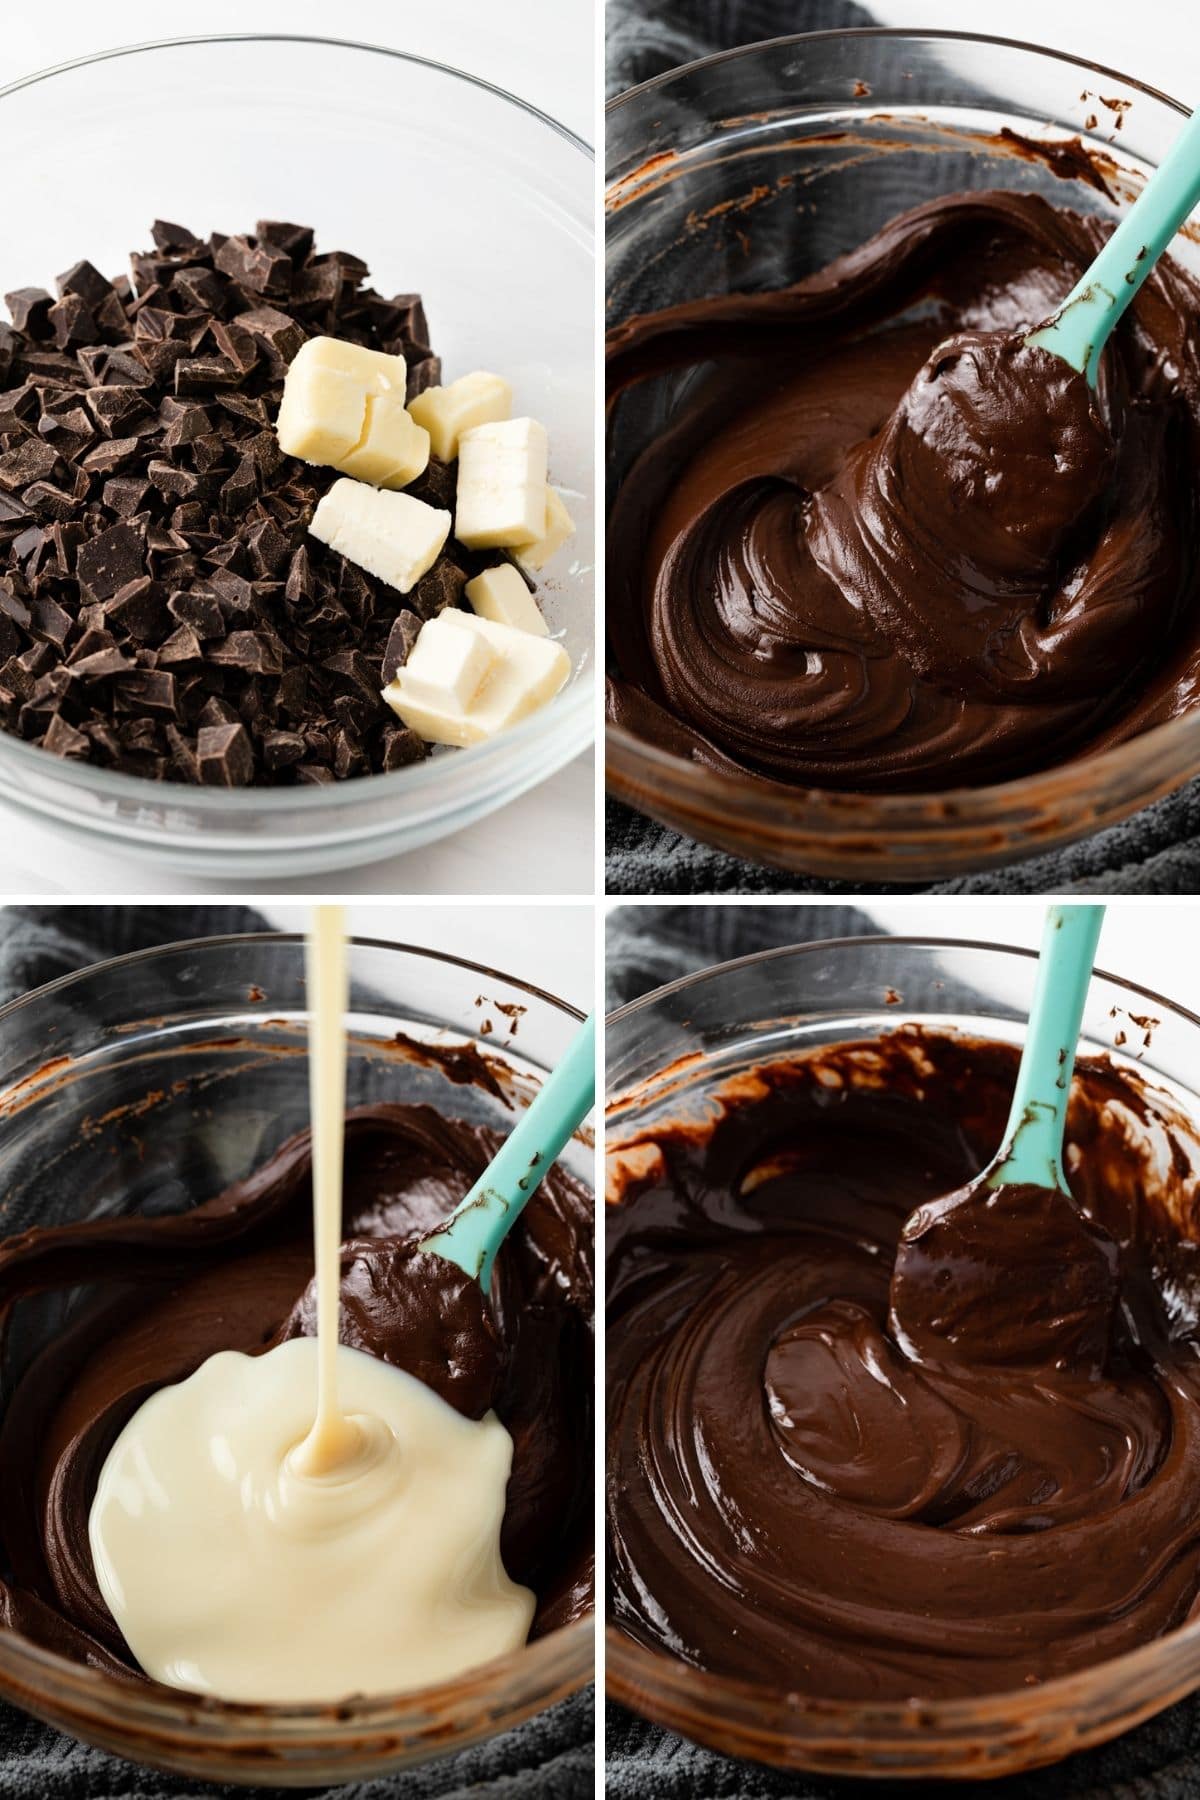 chopped chocolate and butter in a glass bowl, melted chocolate in glass bowl, condensed milk poured into melted chocolate, and gooey fudge mixture in glass bowl